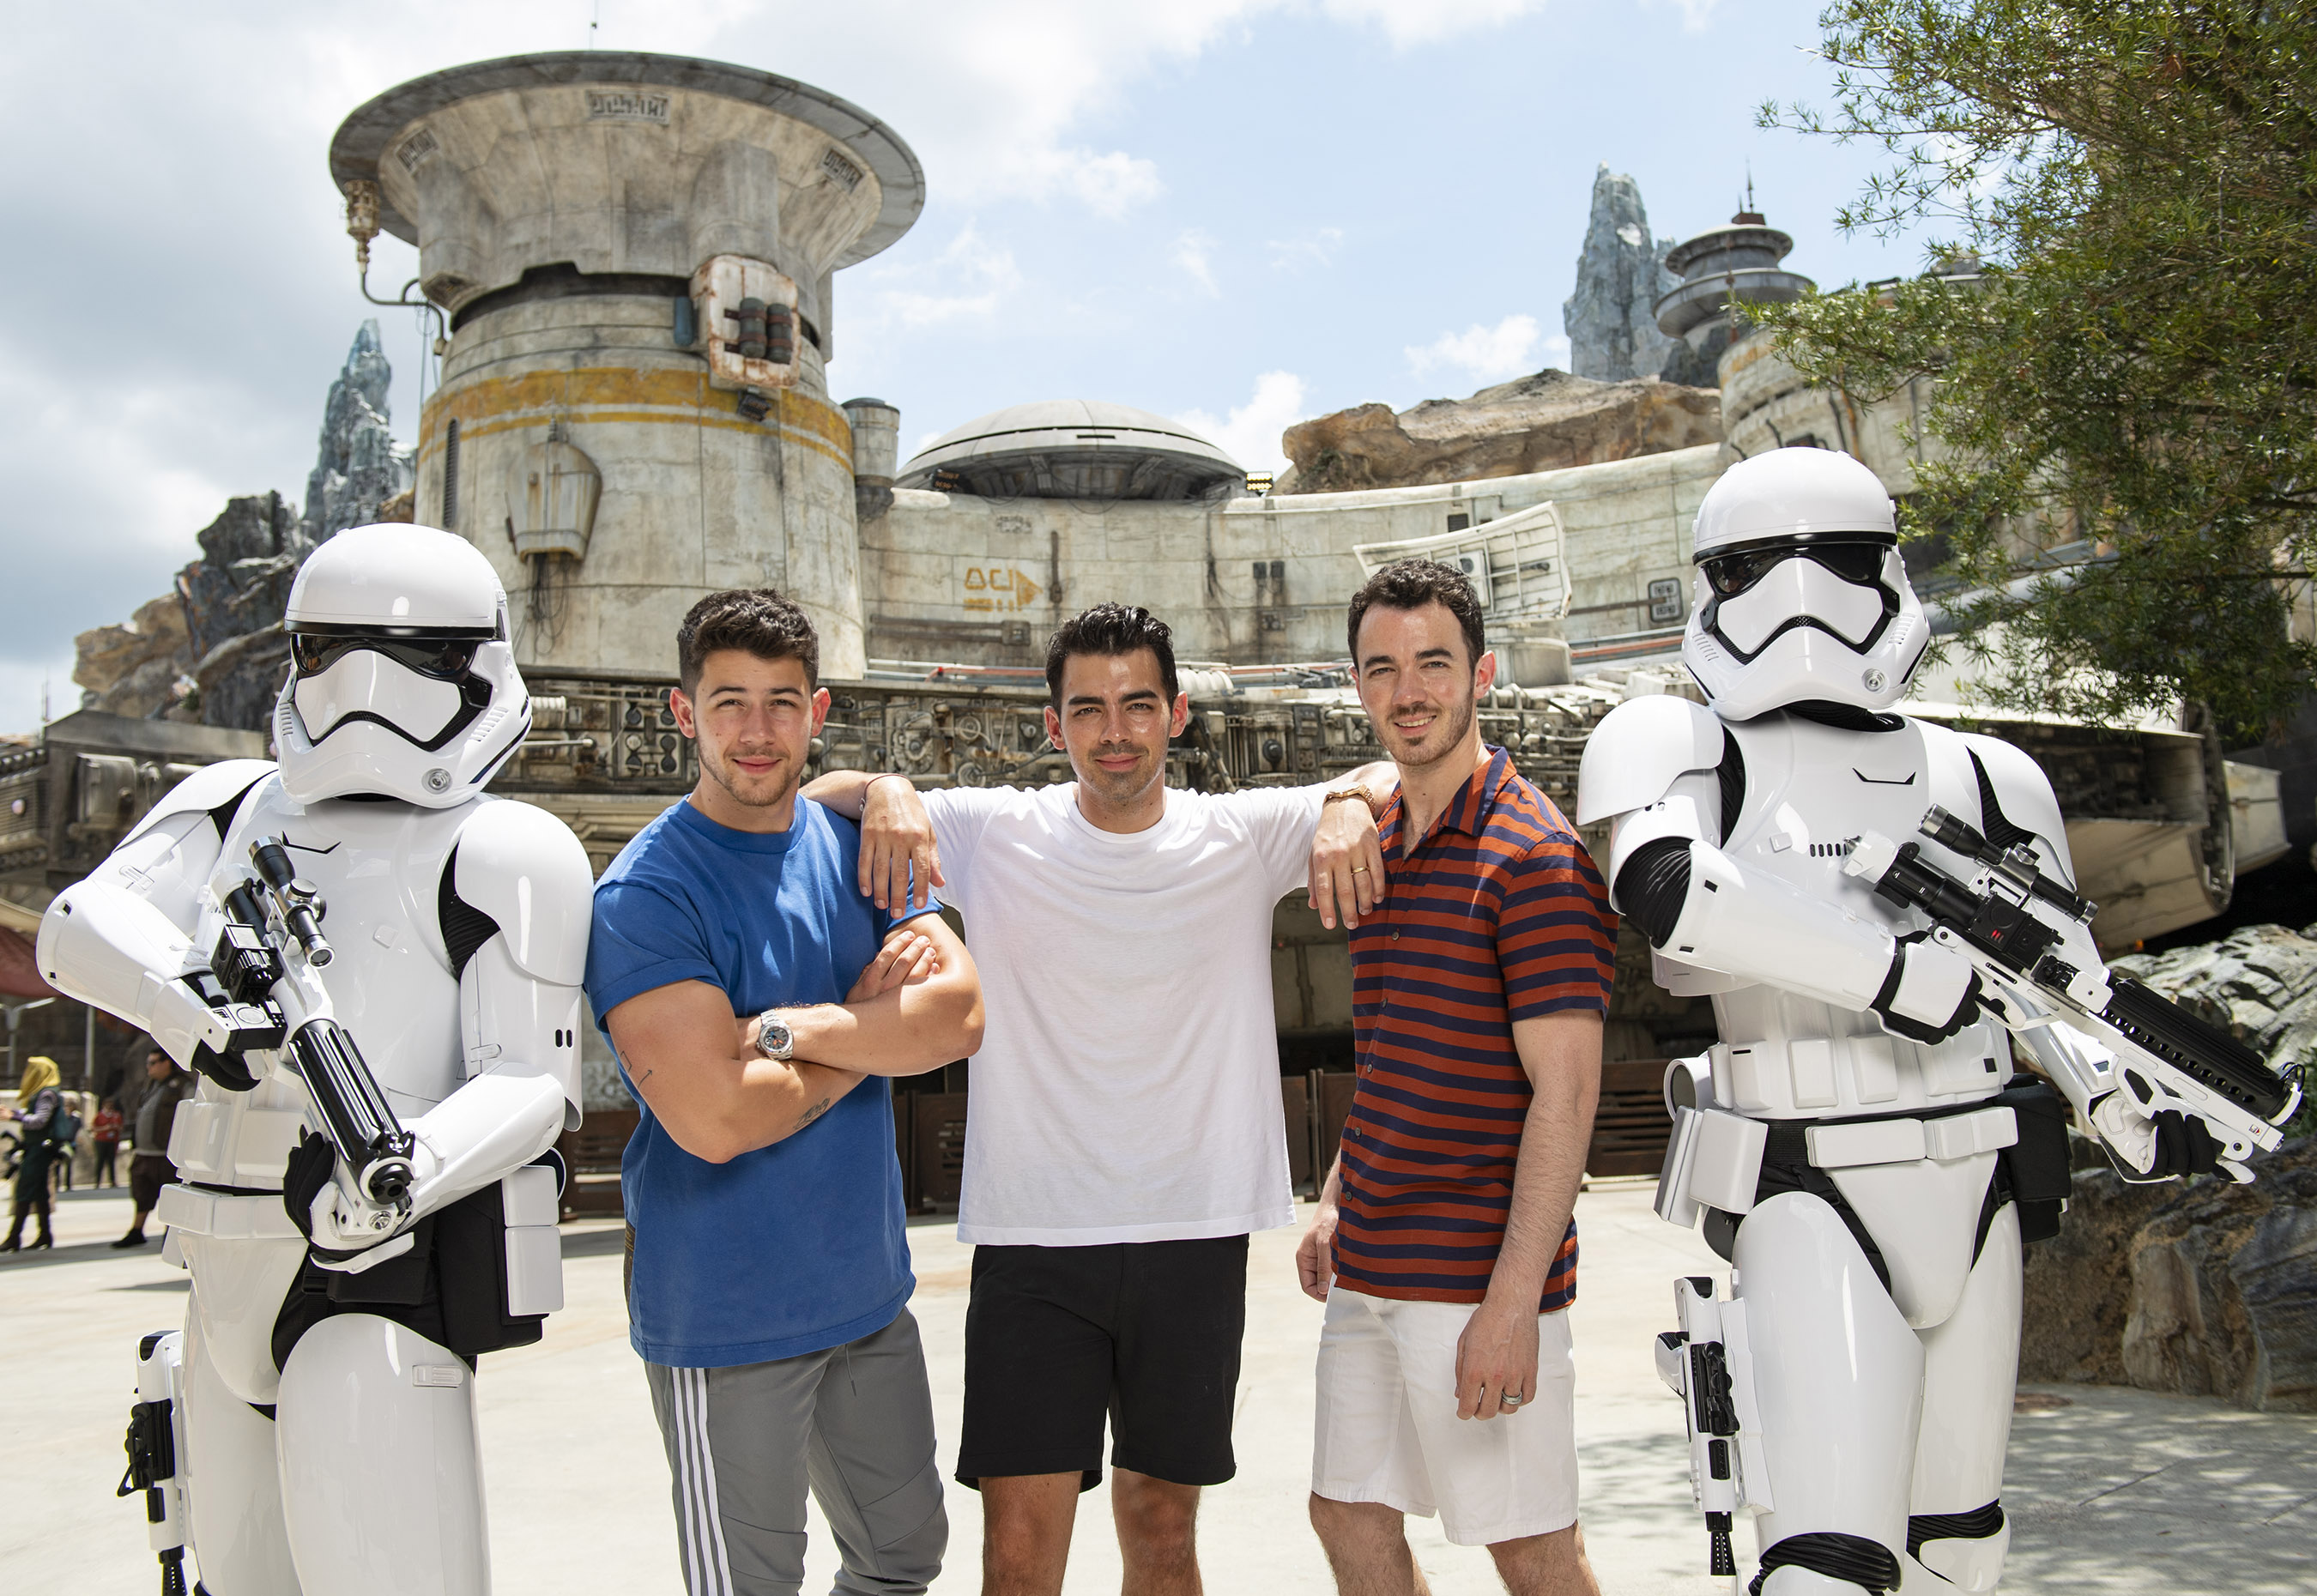 See what the Jonas Brothers did at Walt Disney World | SparklyEverAfter.com